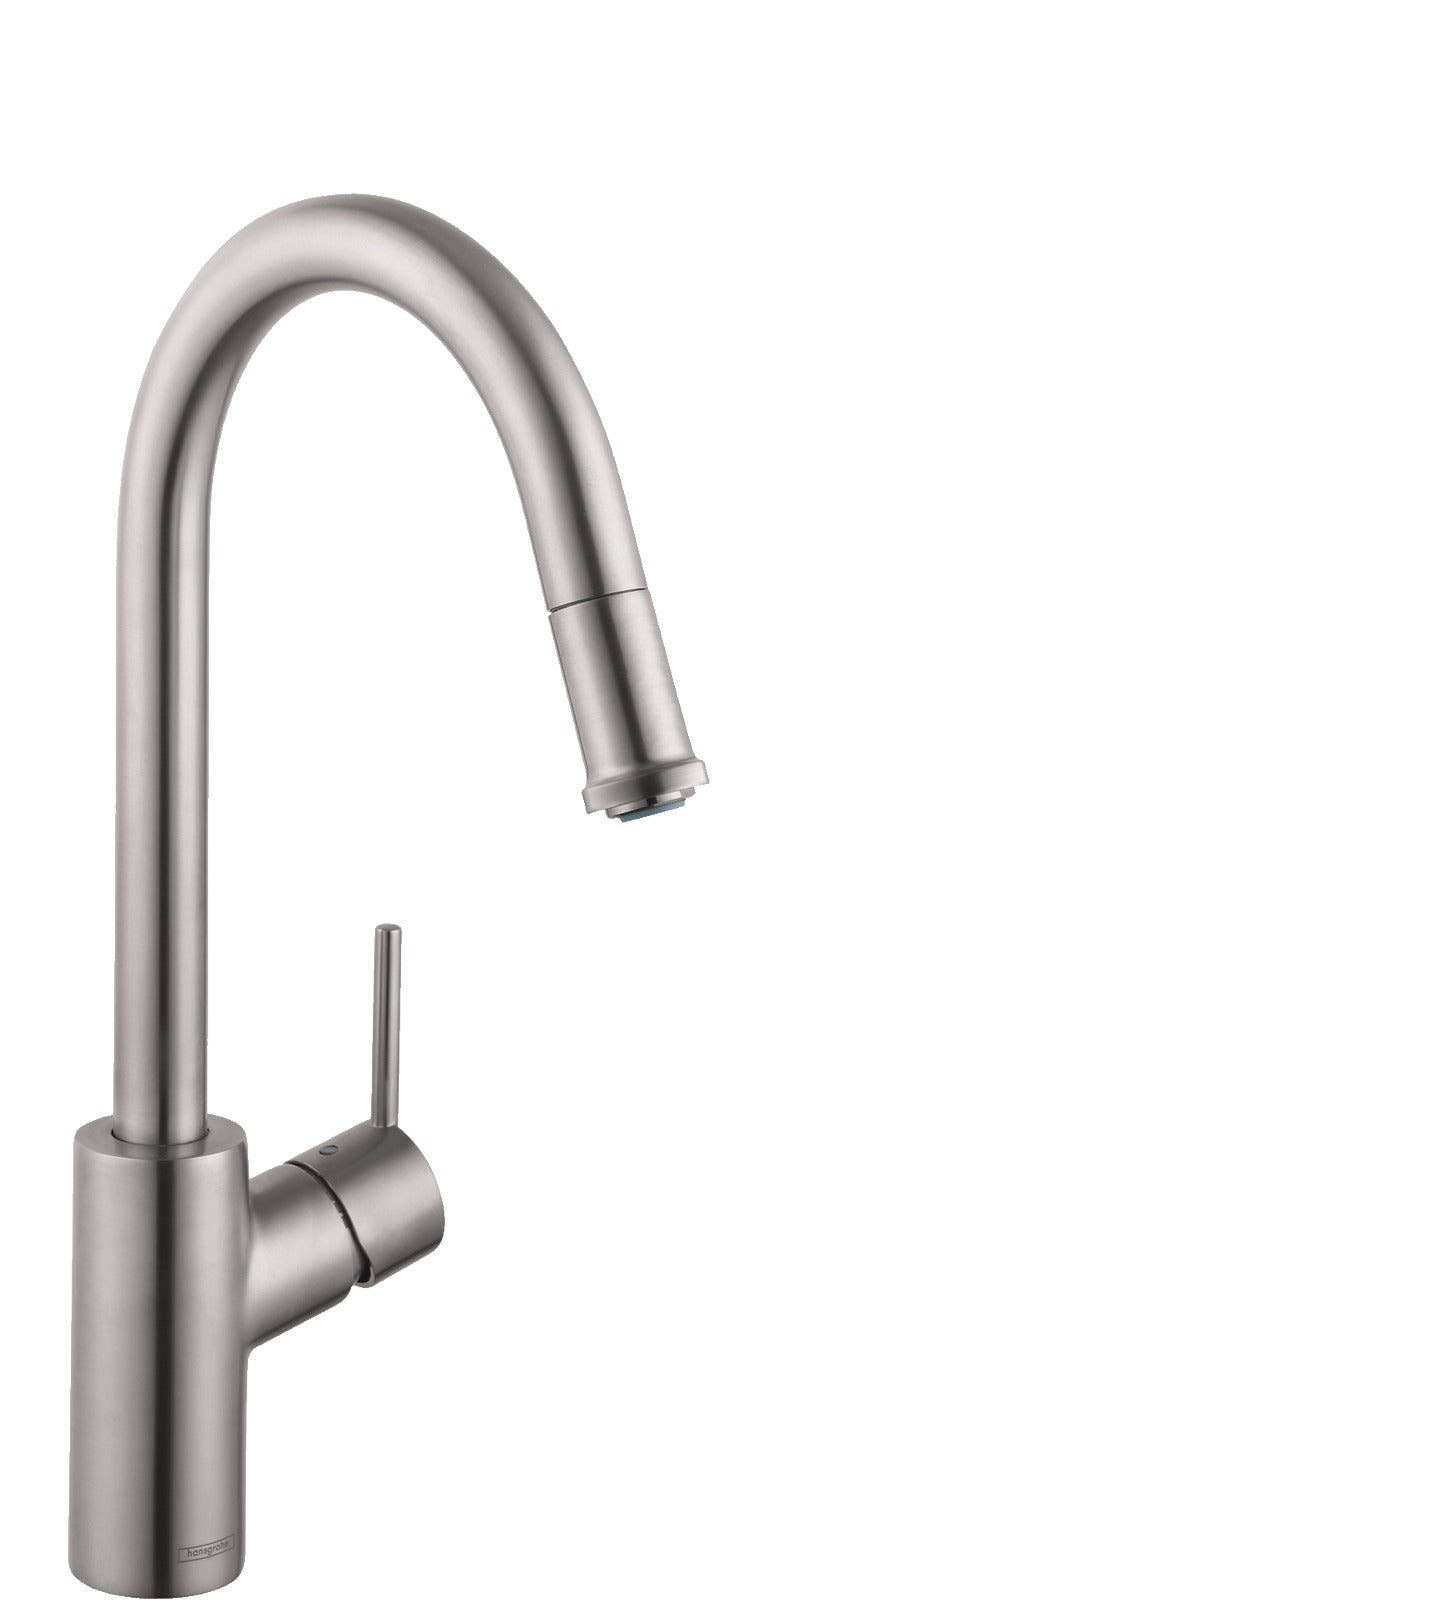 HANSGROHE 14872801 Stainless Steel Optic Talis S² Modern Kitchen Faucet 1.75 GPM